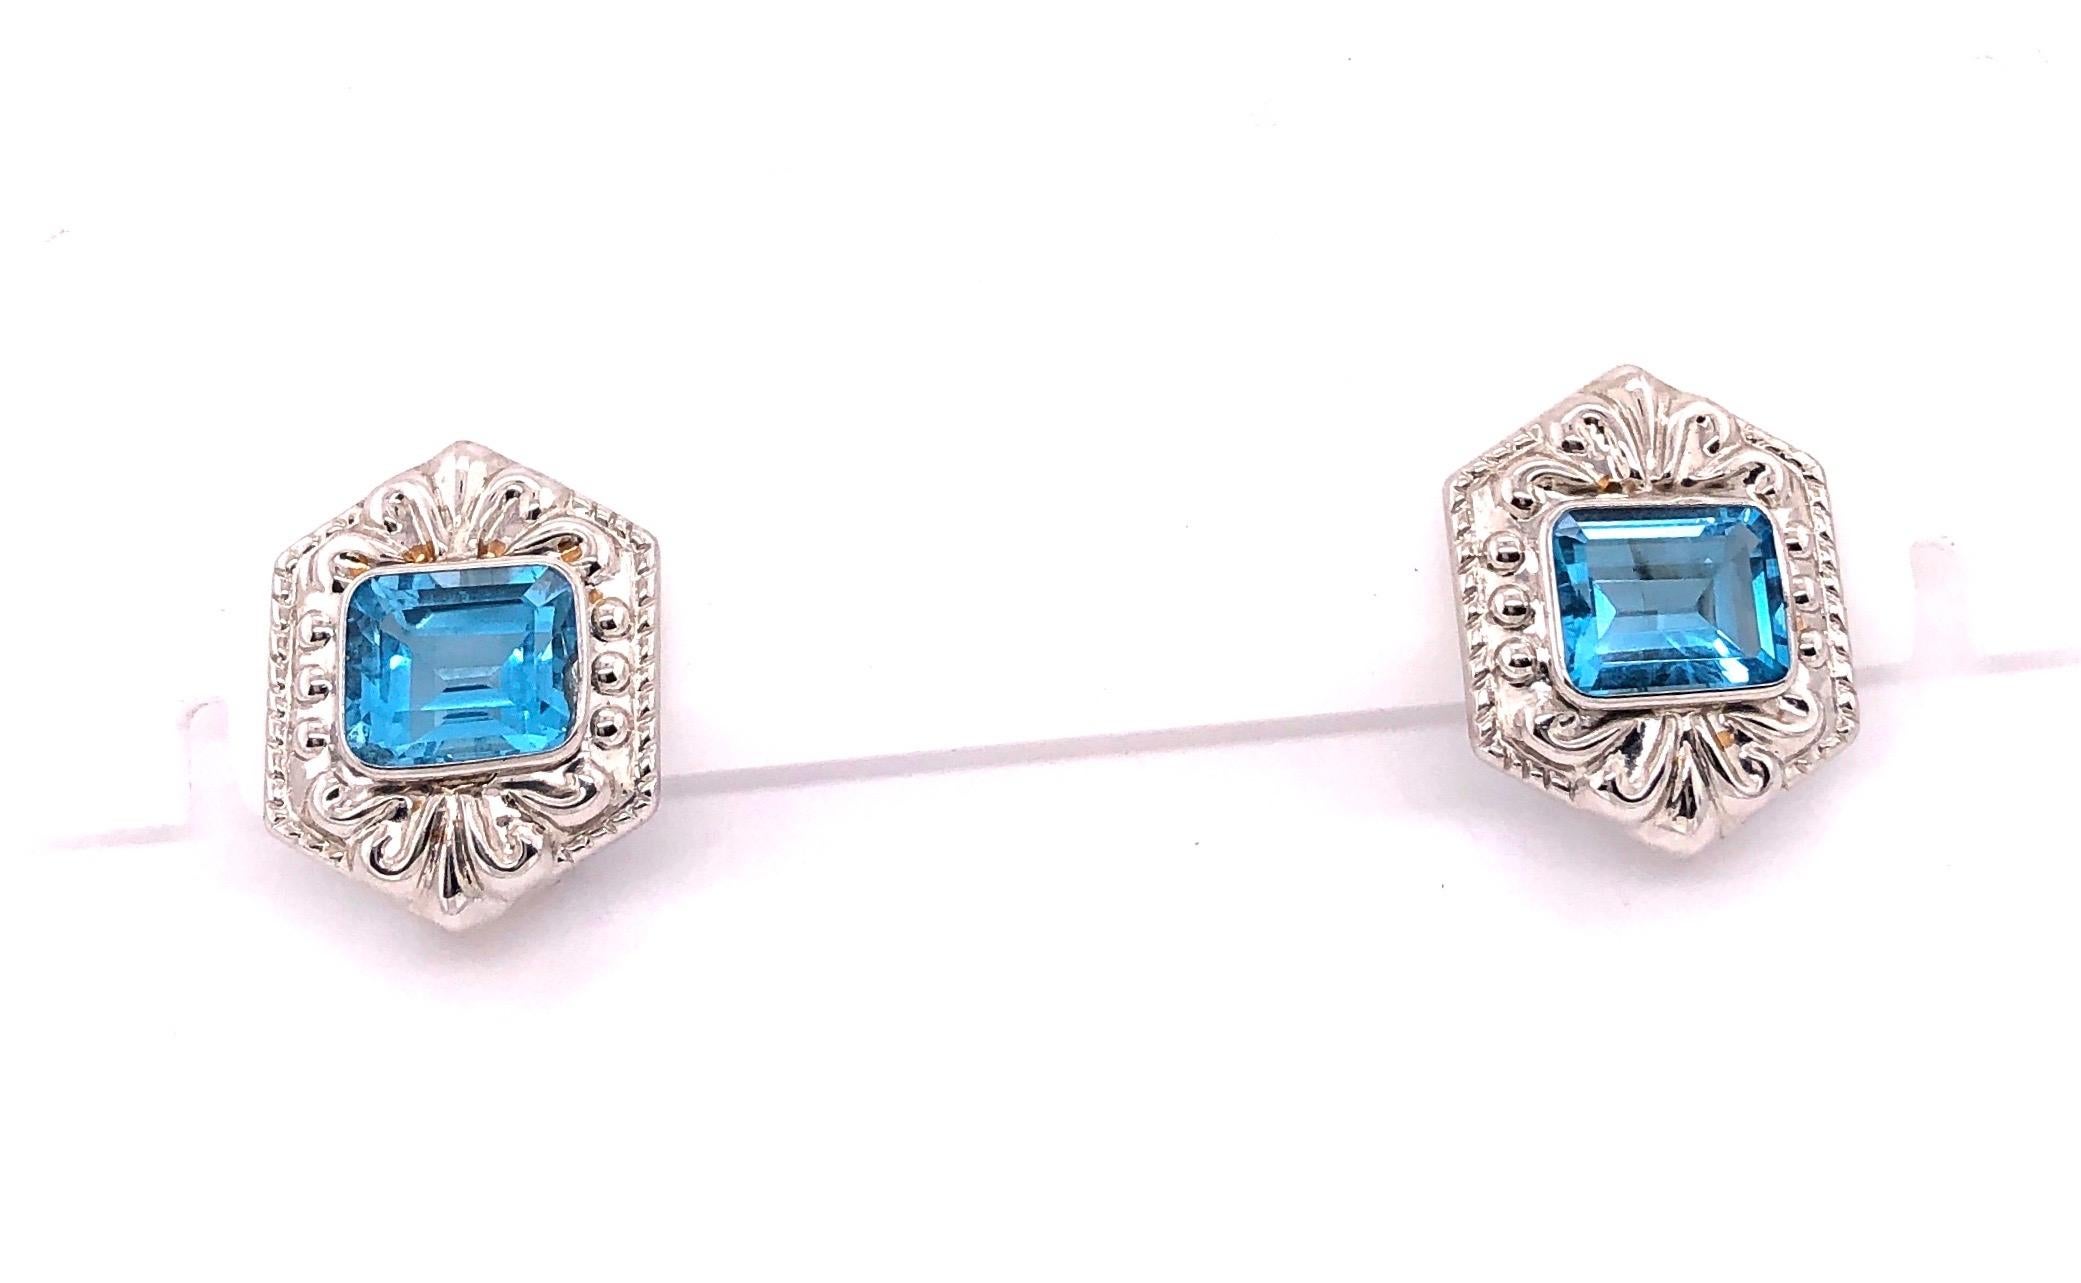 14 Karat White Gold French Back Huggie Earrings with Blue Topaz For Sale 3